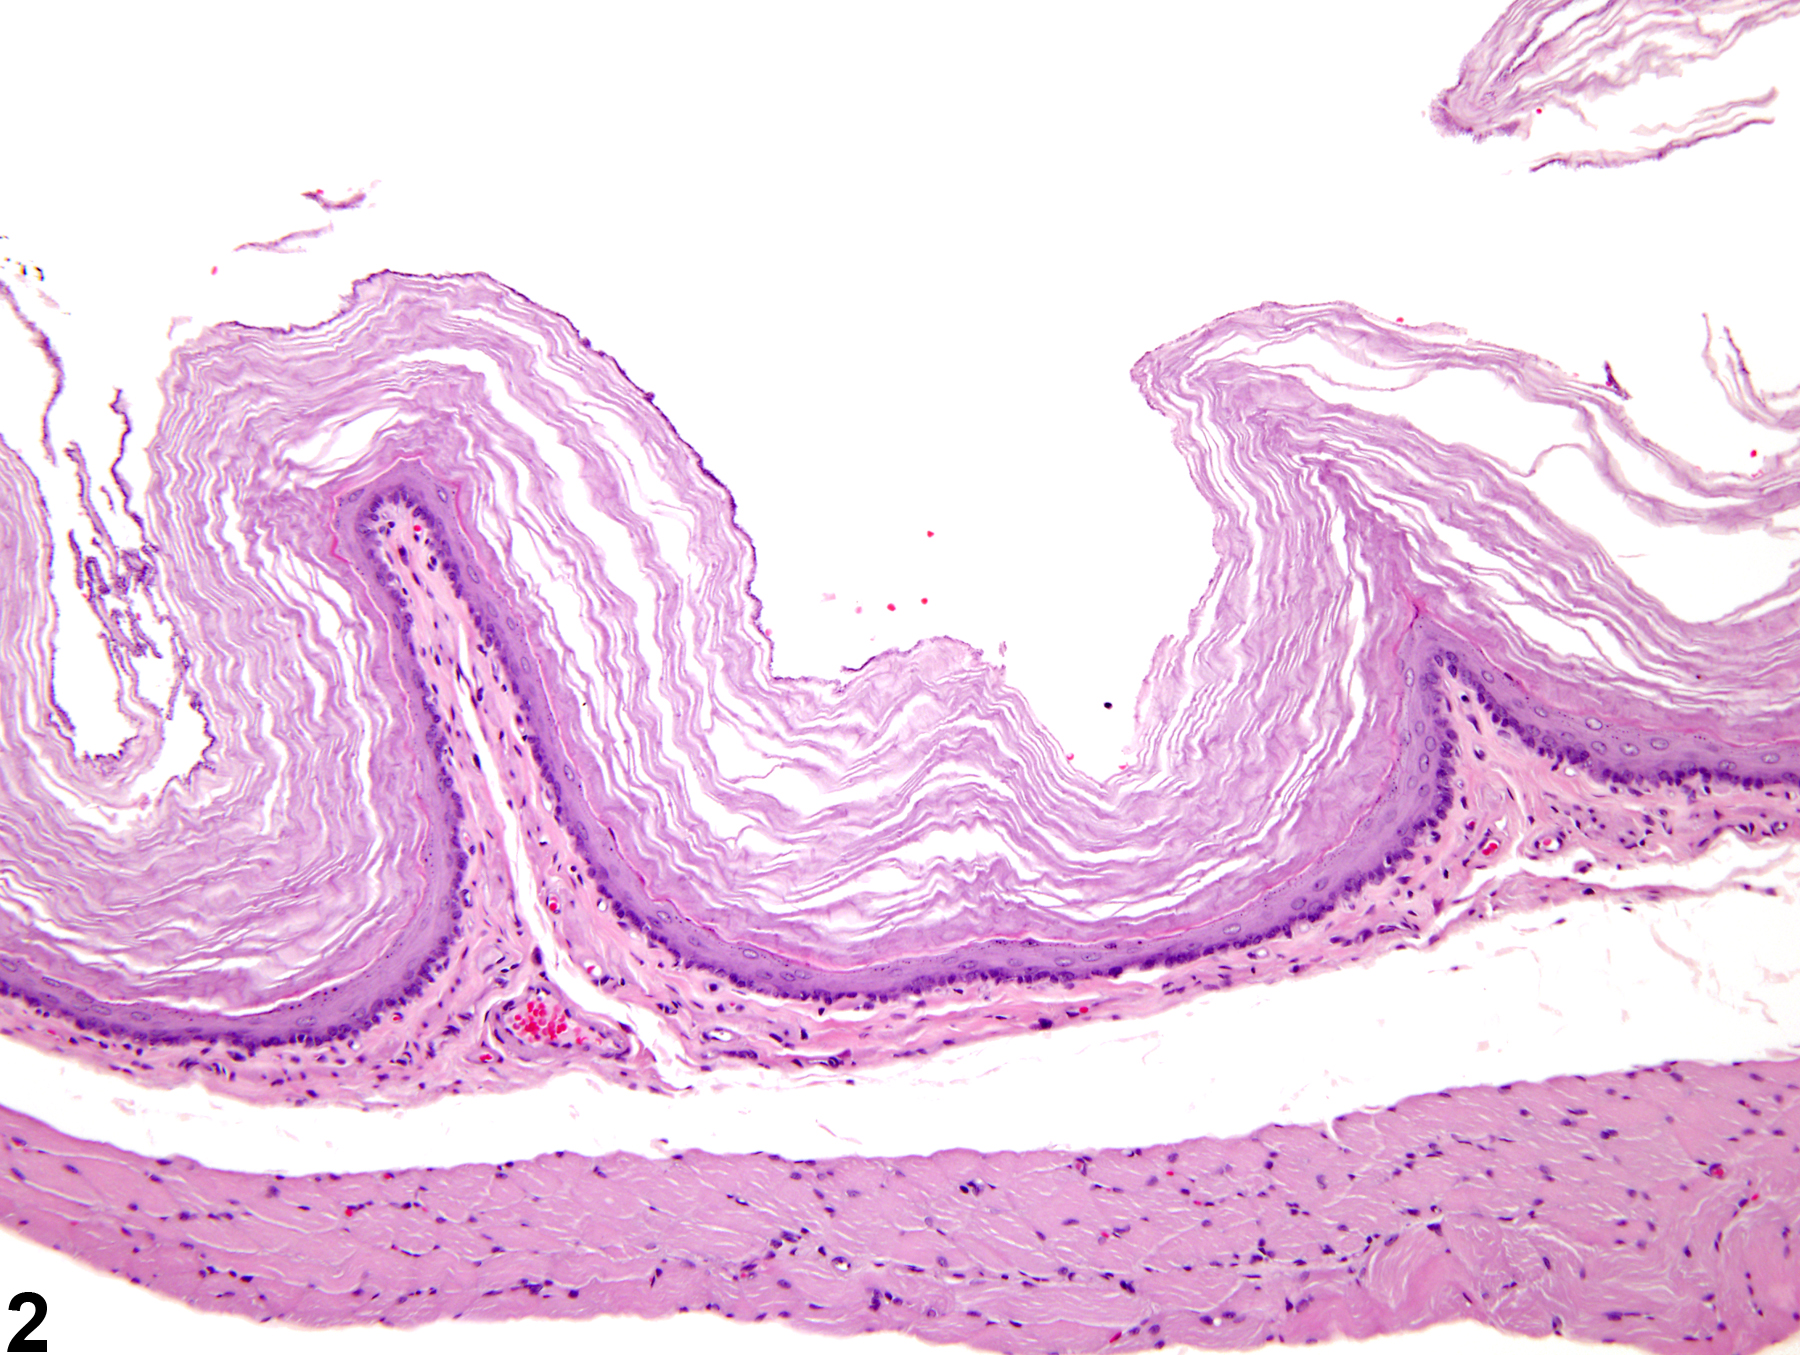 Image of hyperkeratosis in the esophagus from a female F344/N rat in a chronic study